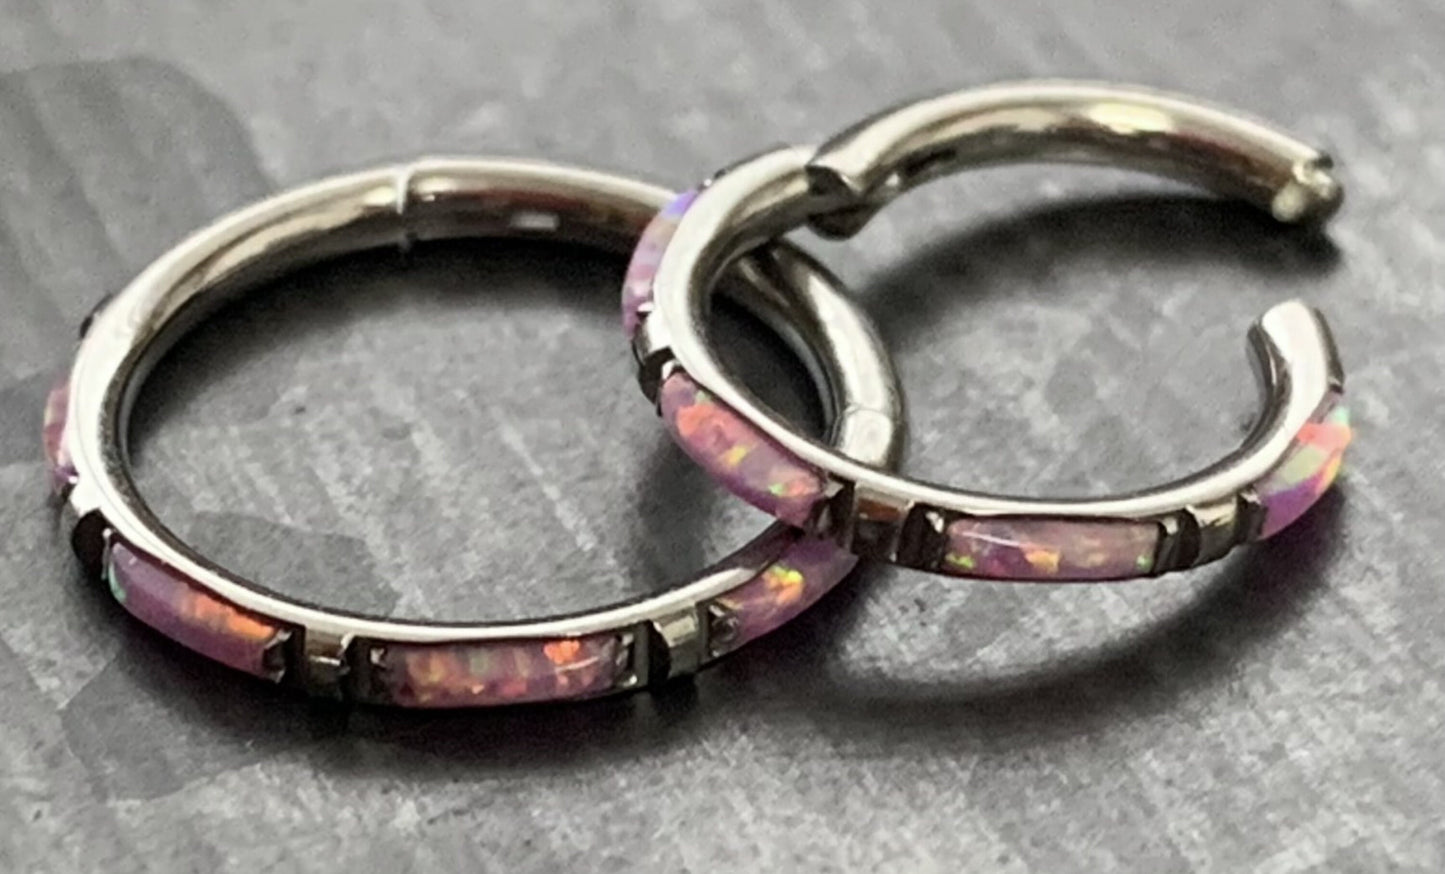 1 Piece Implant Grade Titanium Baguette Opal Sides Hinged Segment Septum Ring - 16g - 10mm, 8mm ~ White, Pink and Blue Available!